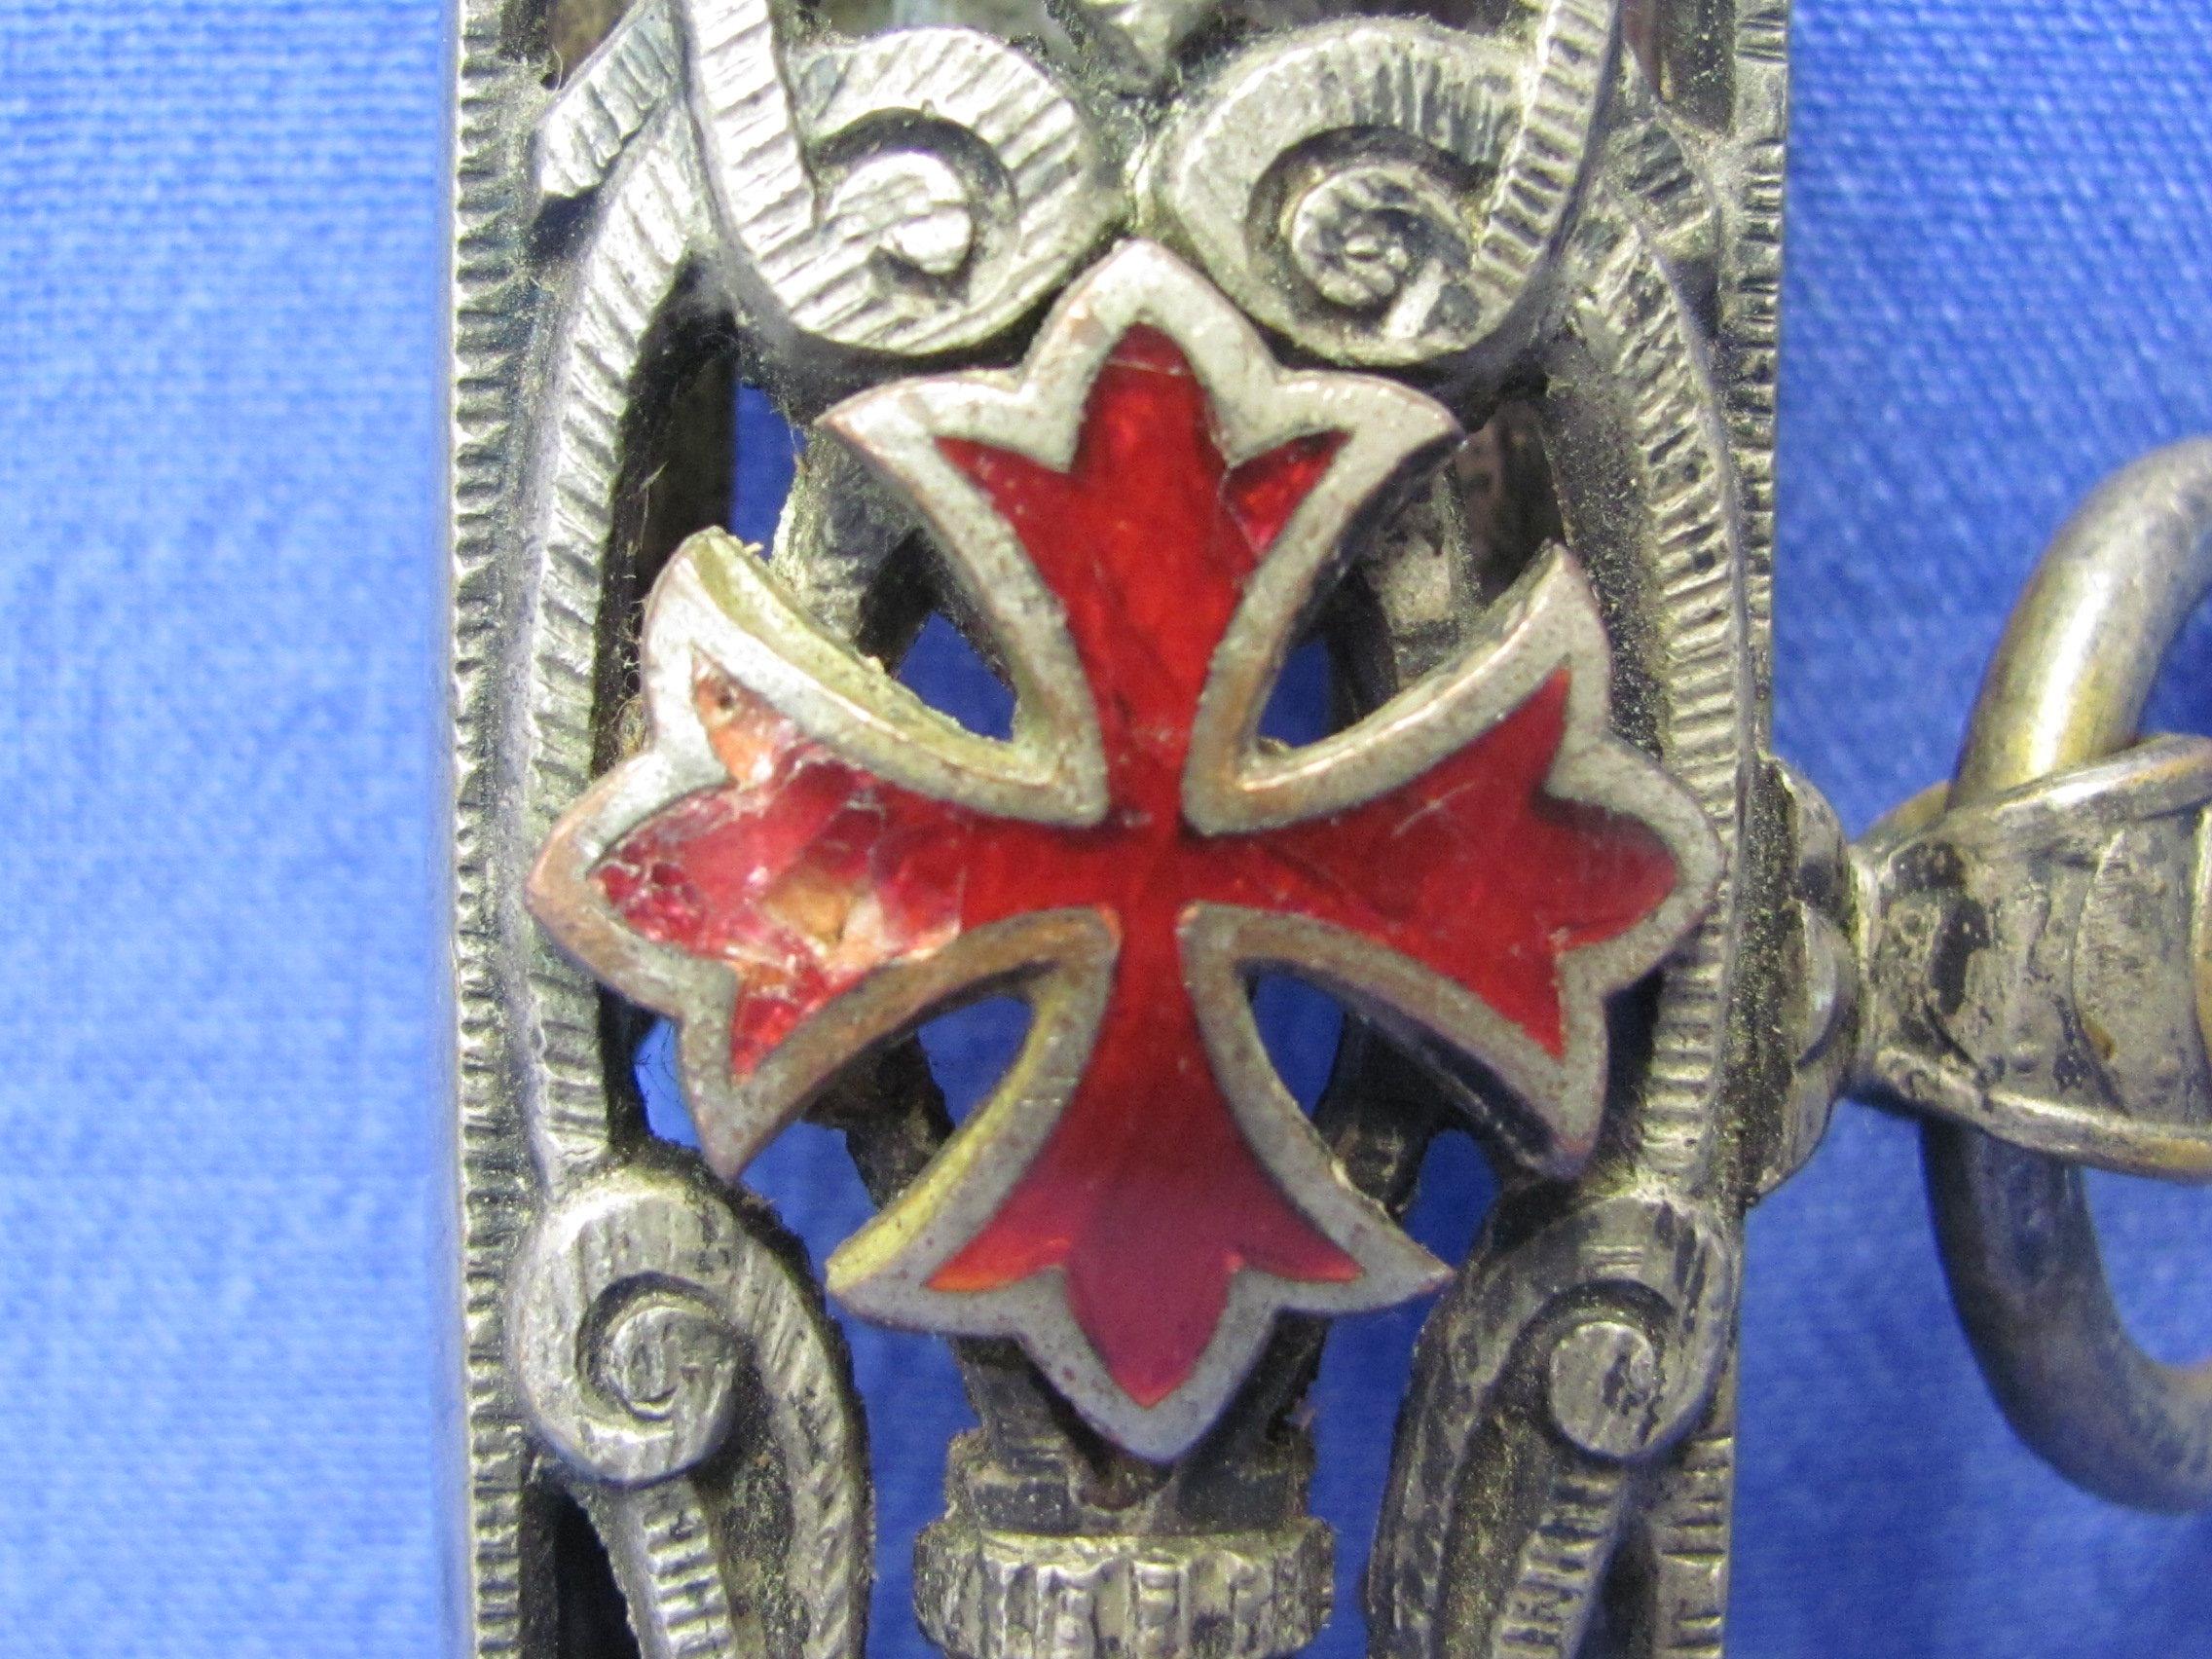 Parts for Sword Scabbard – Eagle & Cross – Maltese Cross – Silver-plated Brass?